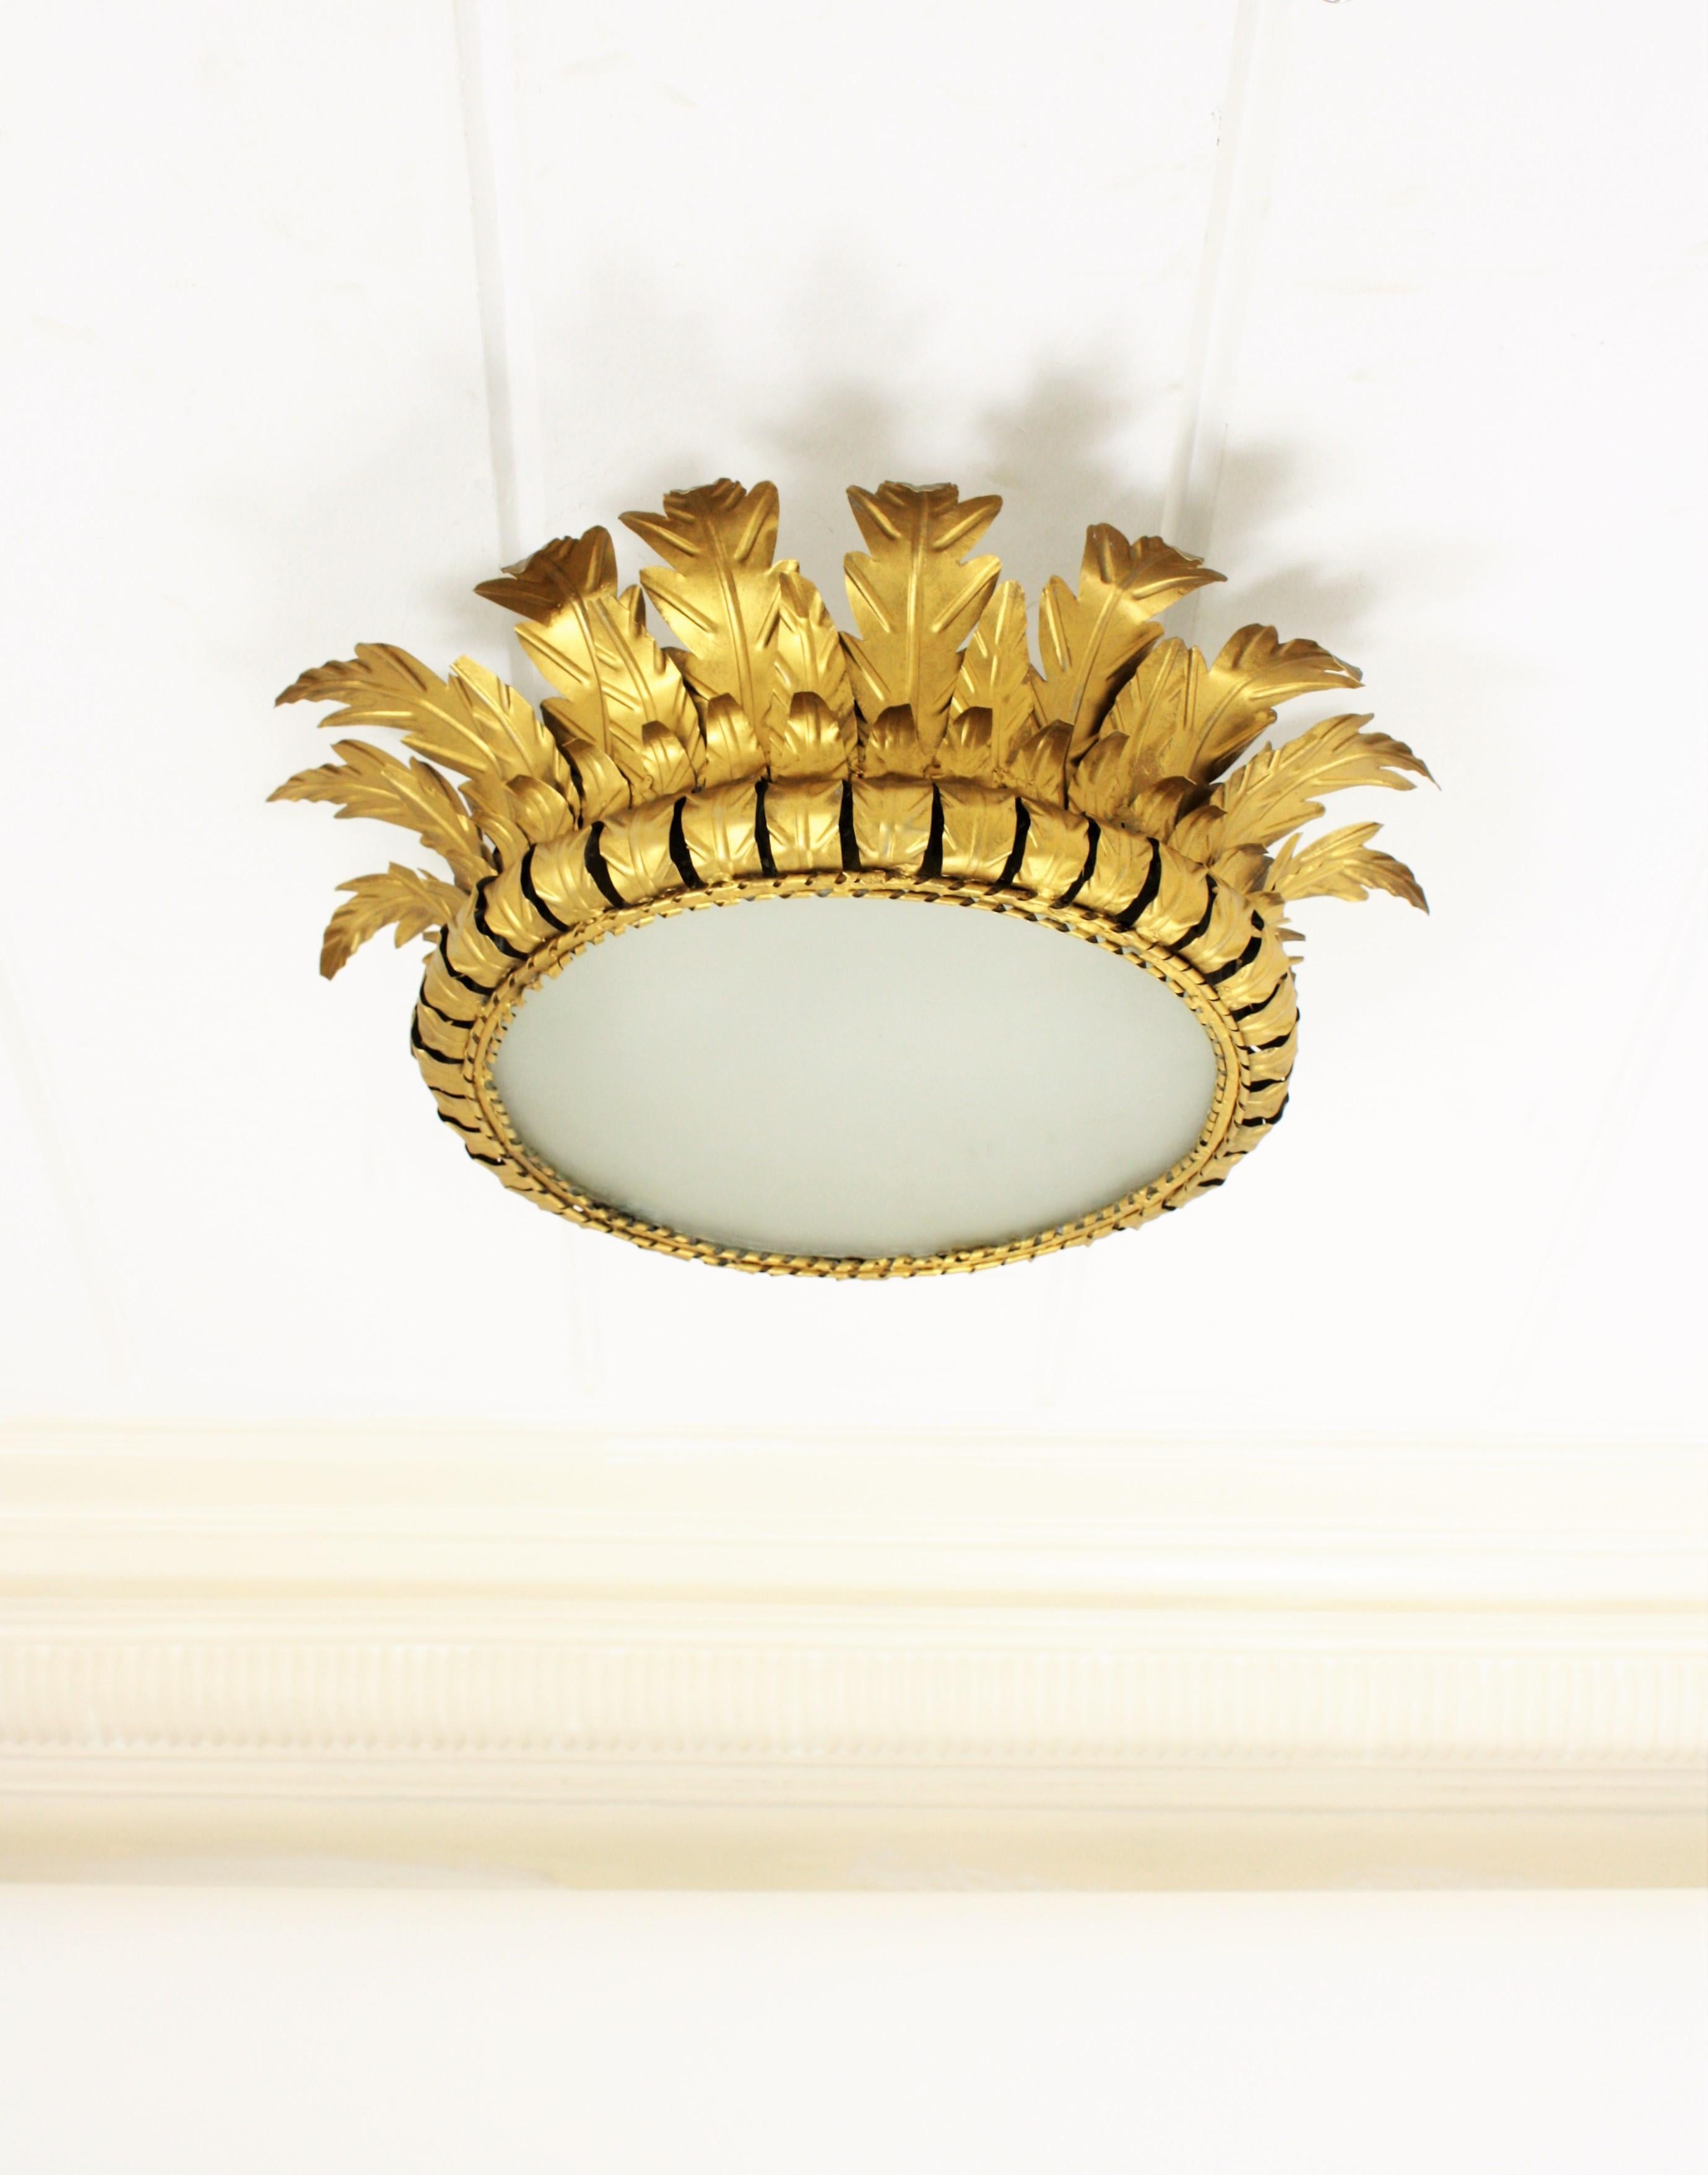 20th Century Sunburst Crown Large Ceiling Light Fixture in Gilt Metal and Frosted Glass